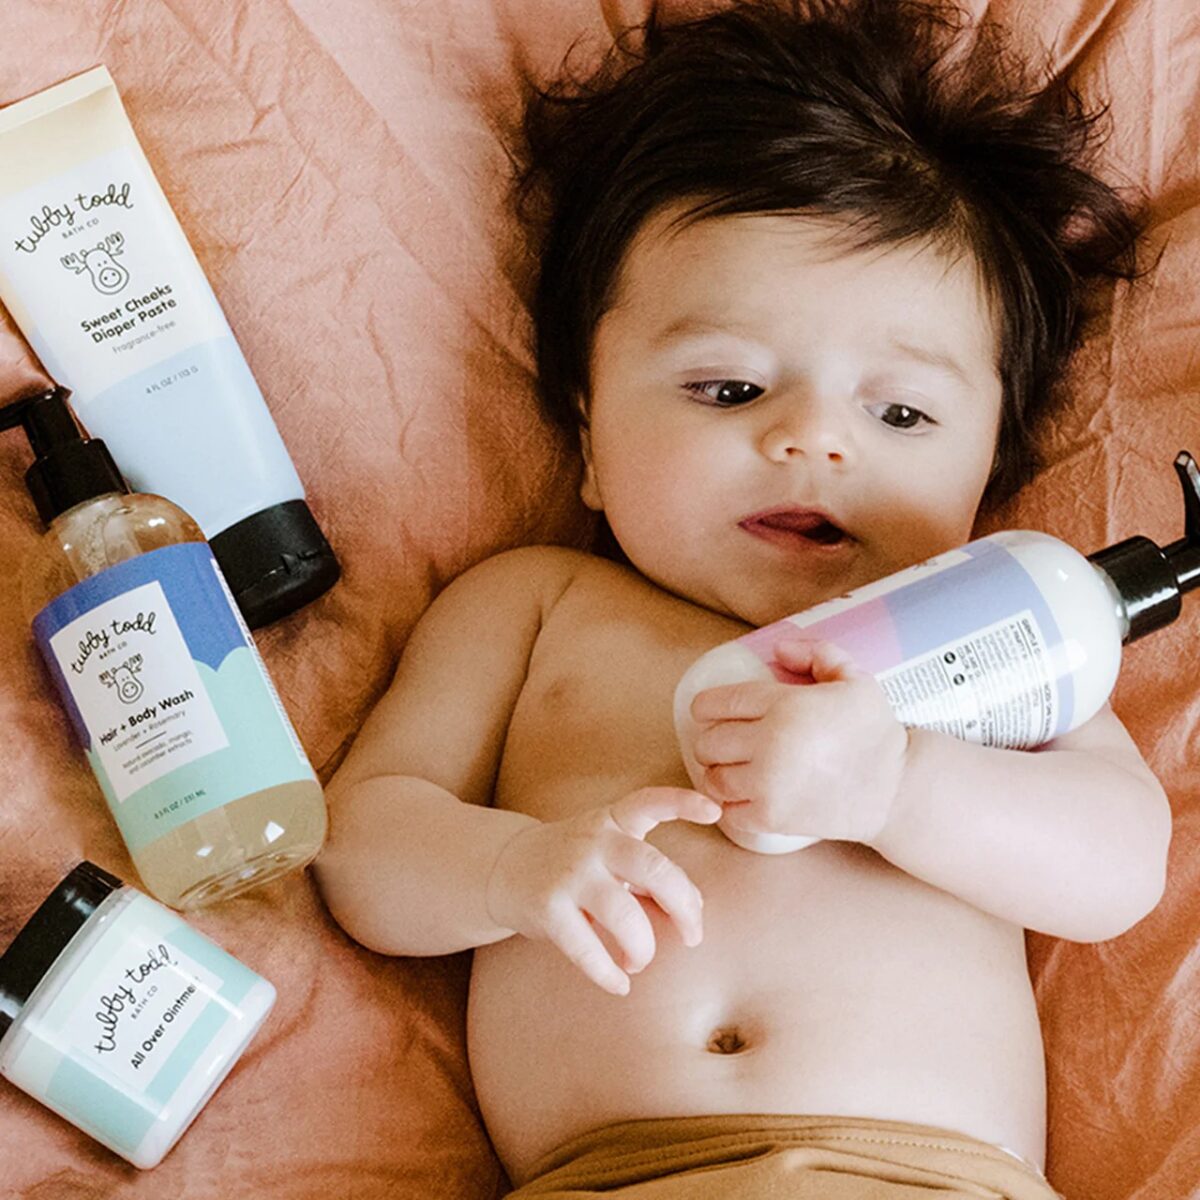 The Baby Bundle Products Image W